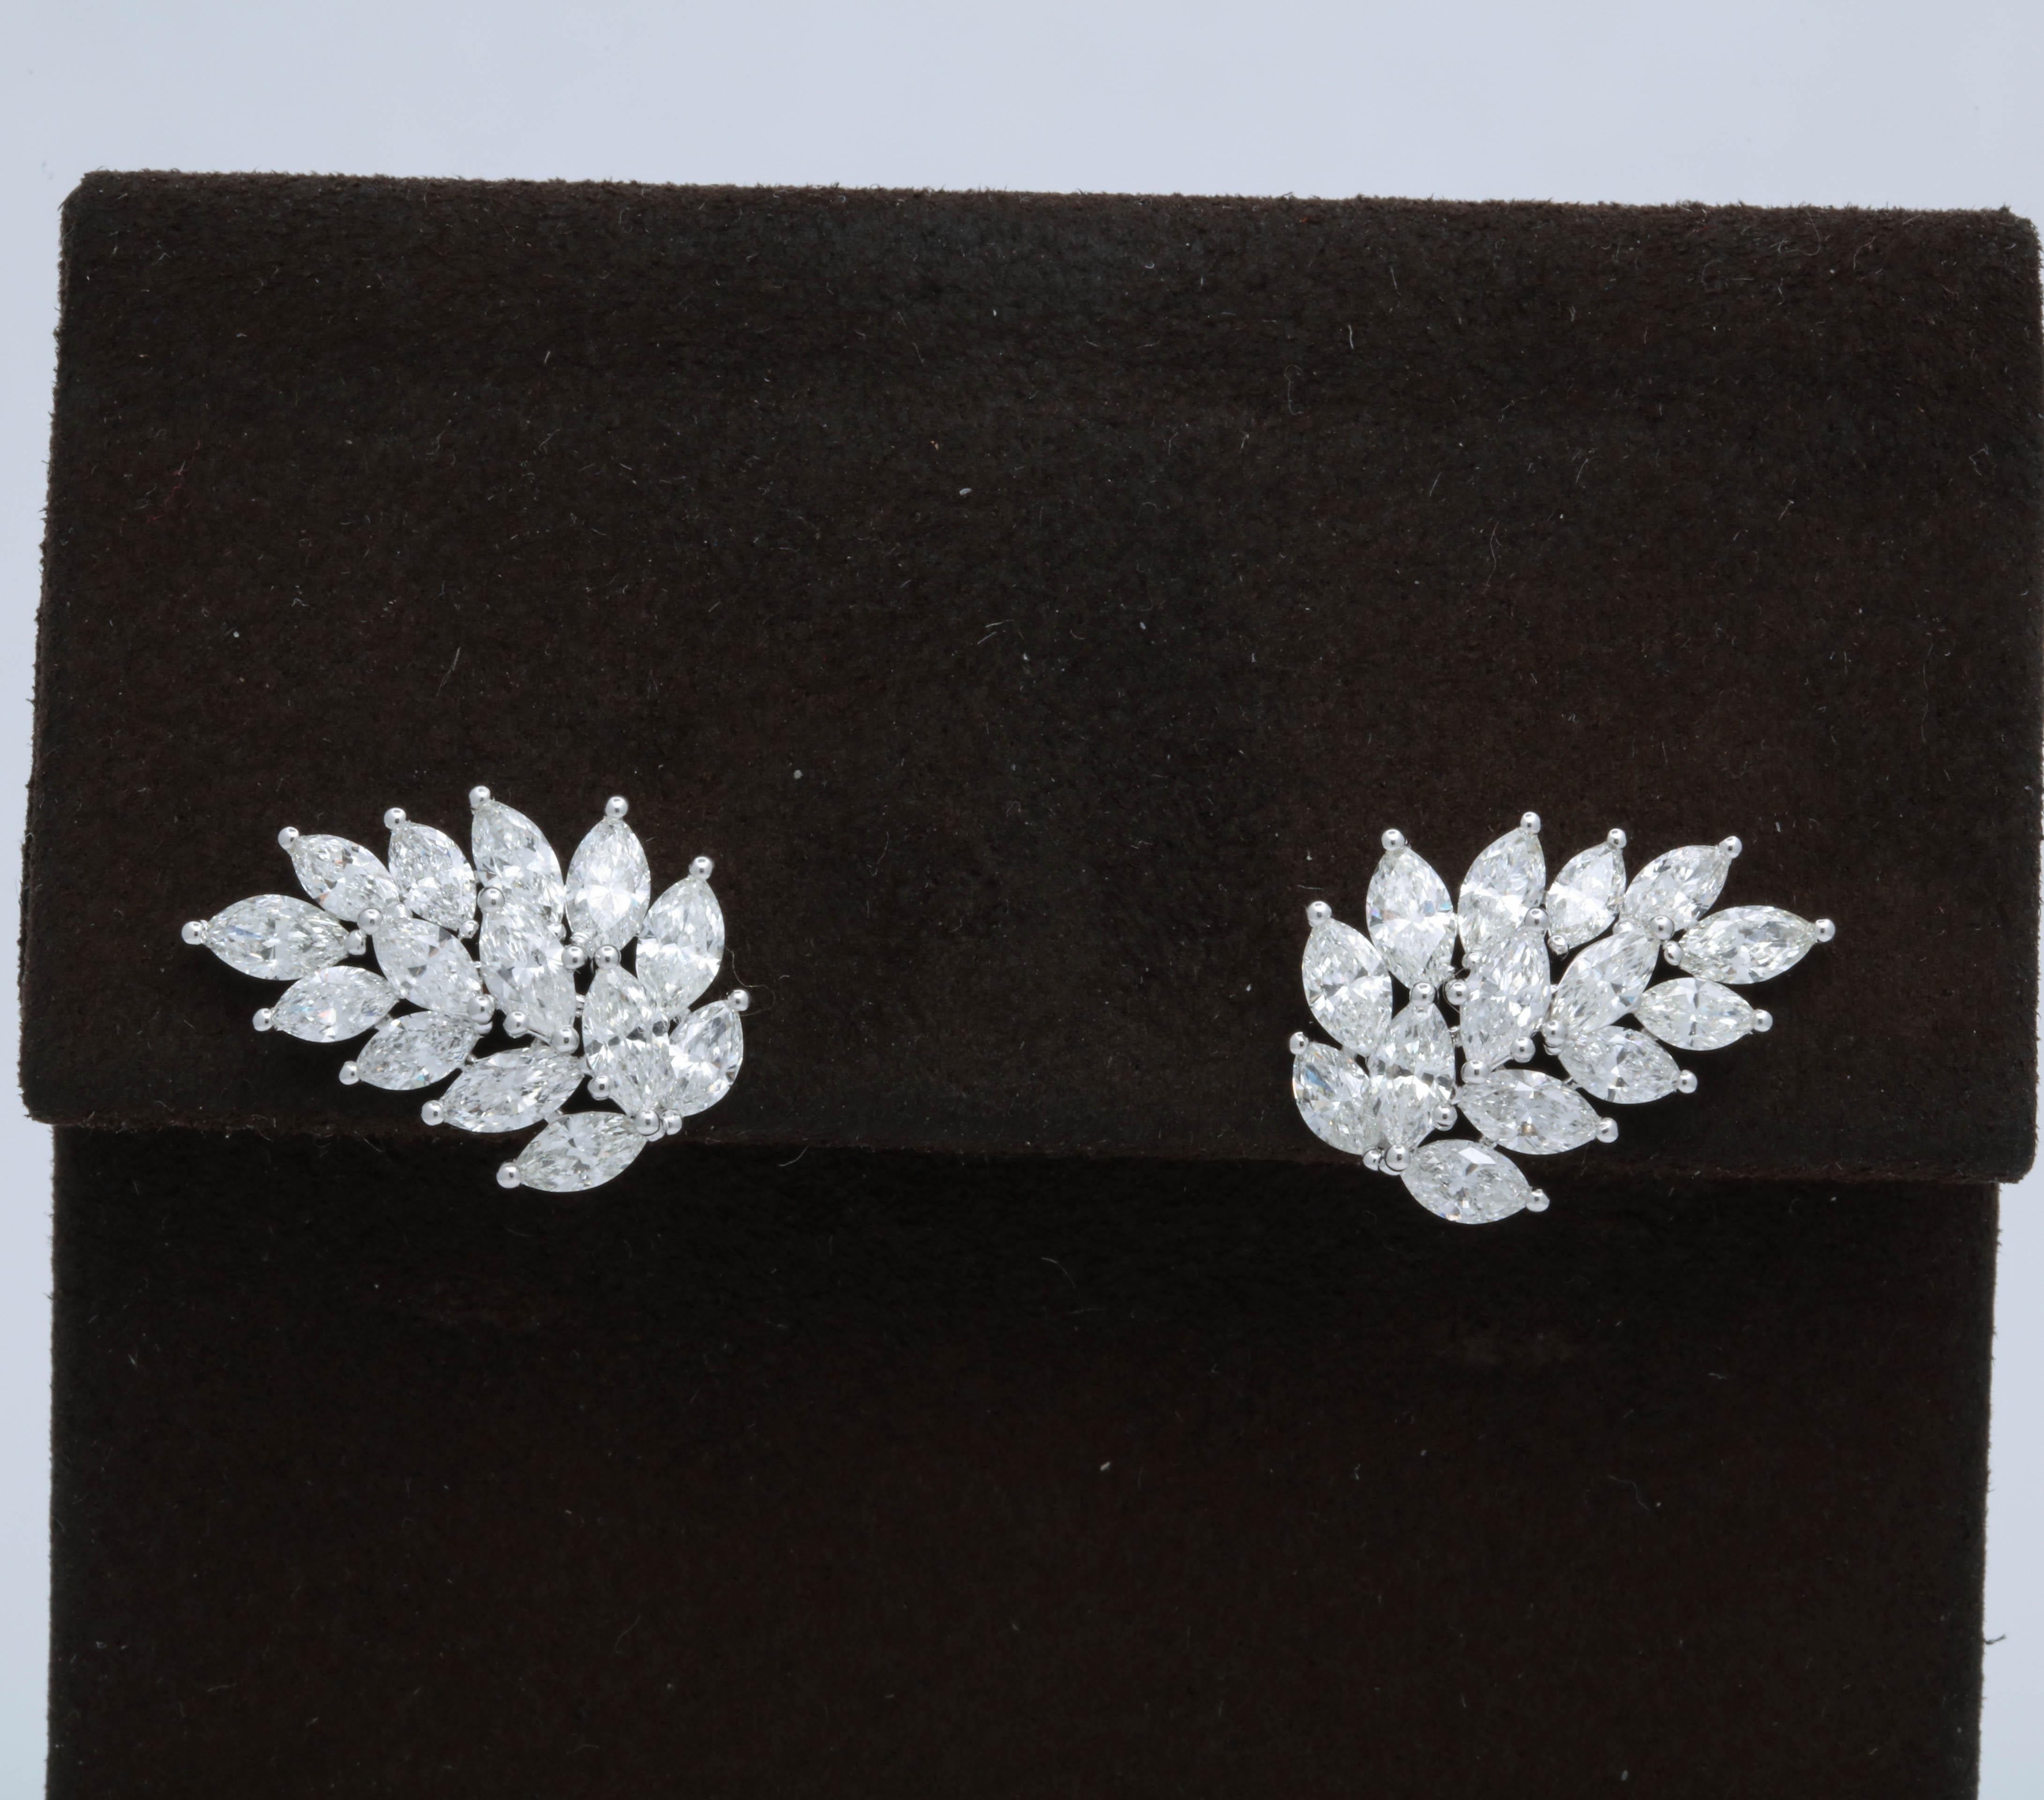 
A versatile pair of cluster earrings -- full of SPARKLE!

4.57 carats of white marquise cut diamonds set in 18k white gold.

The earrings have a push back closing (like a stud earring) so they can be worn sideways to cuff the ear or in any position